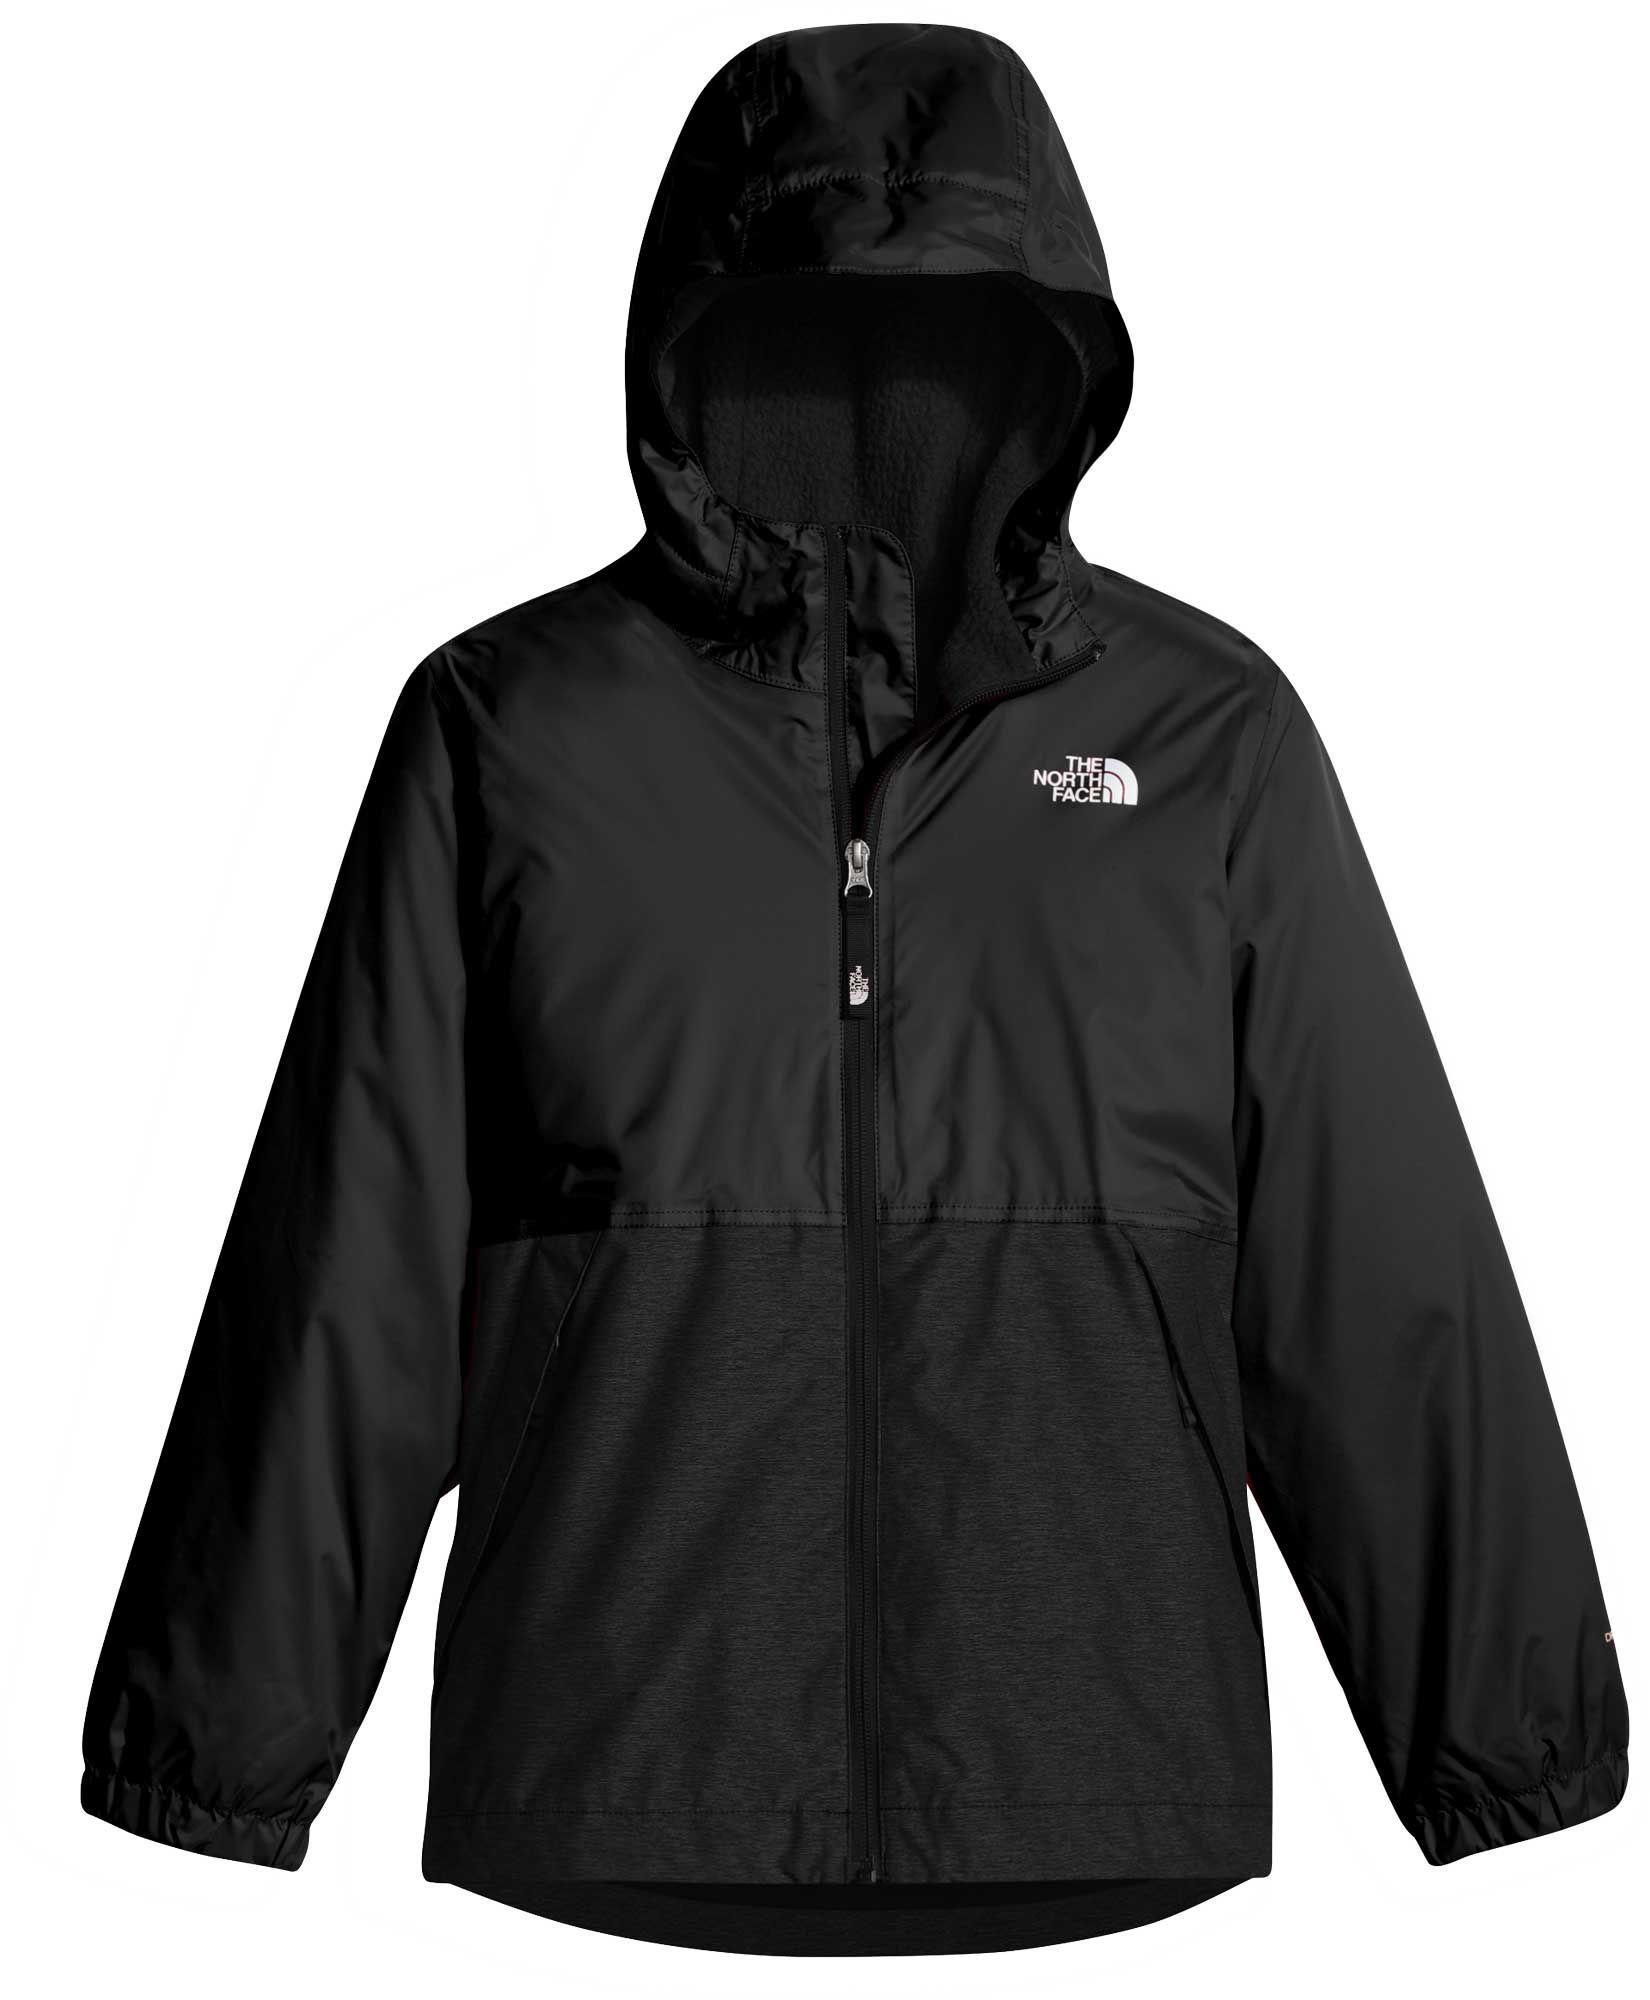 North face jackets on sale at dicks 